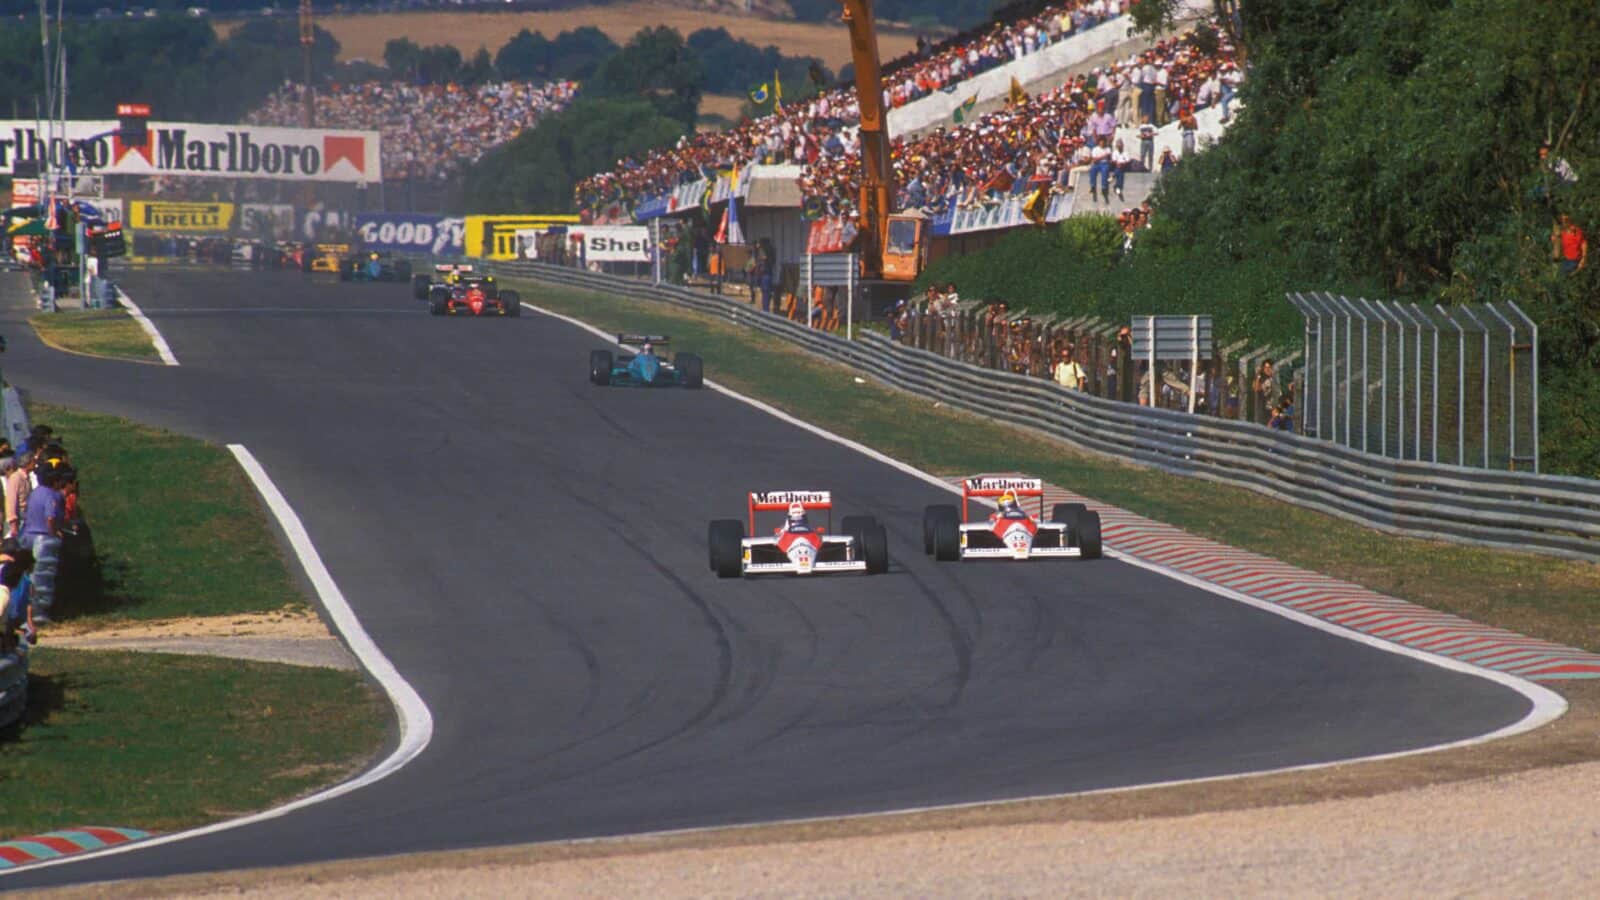 Ayrton Senna is passed by Alain Prost at Estoril in 1988